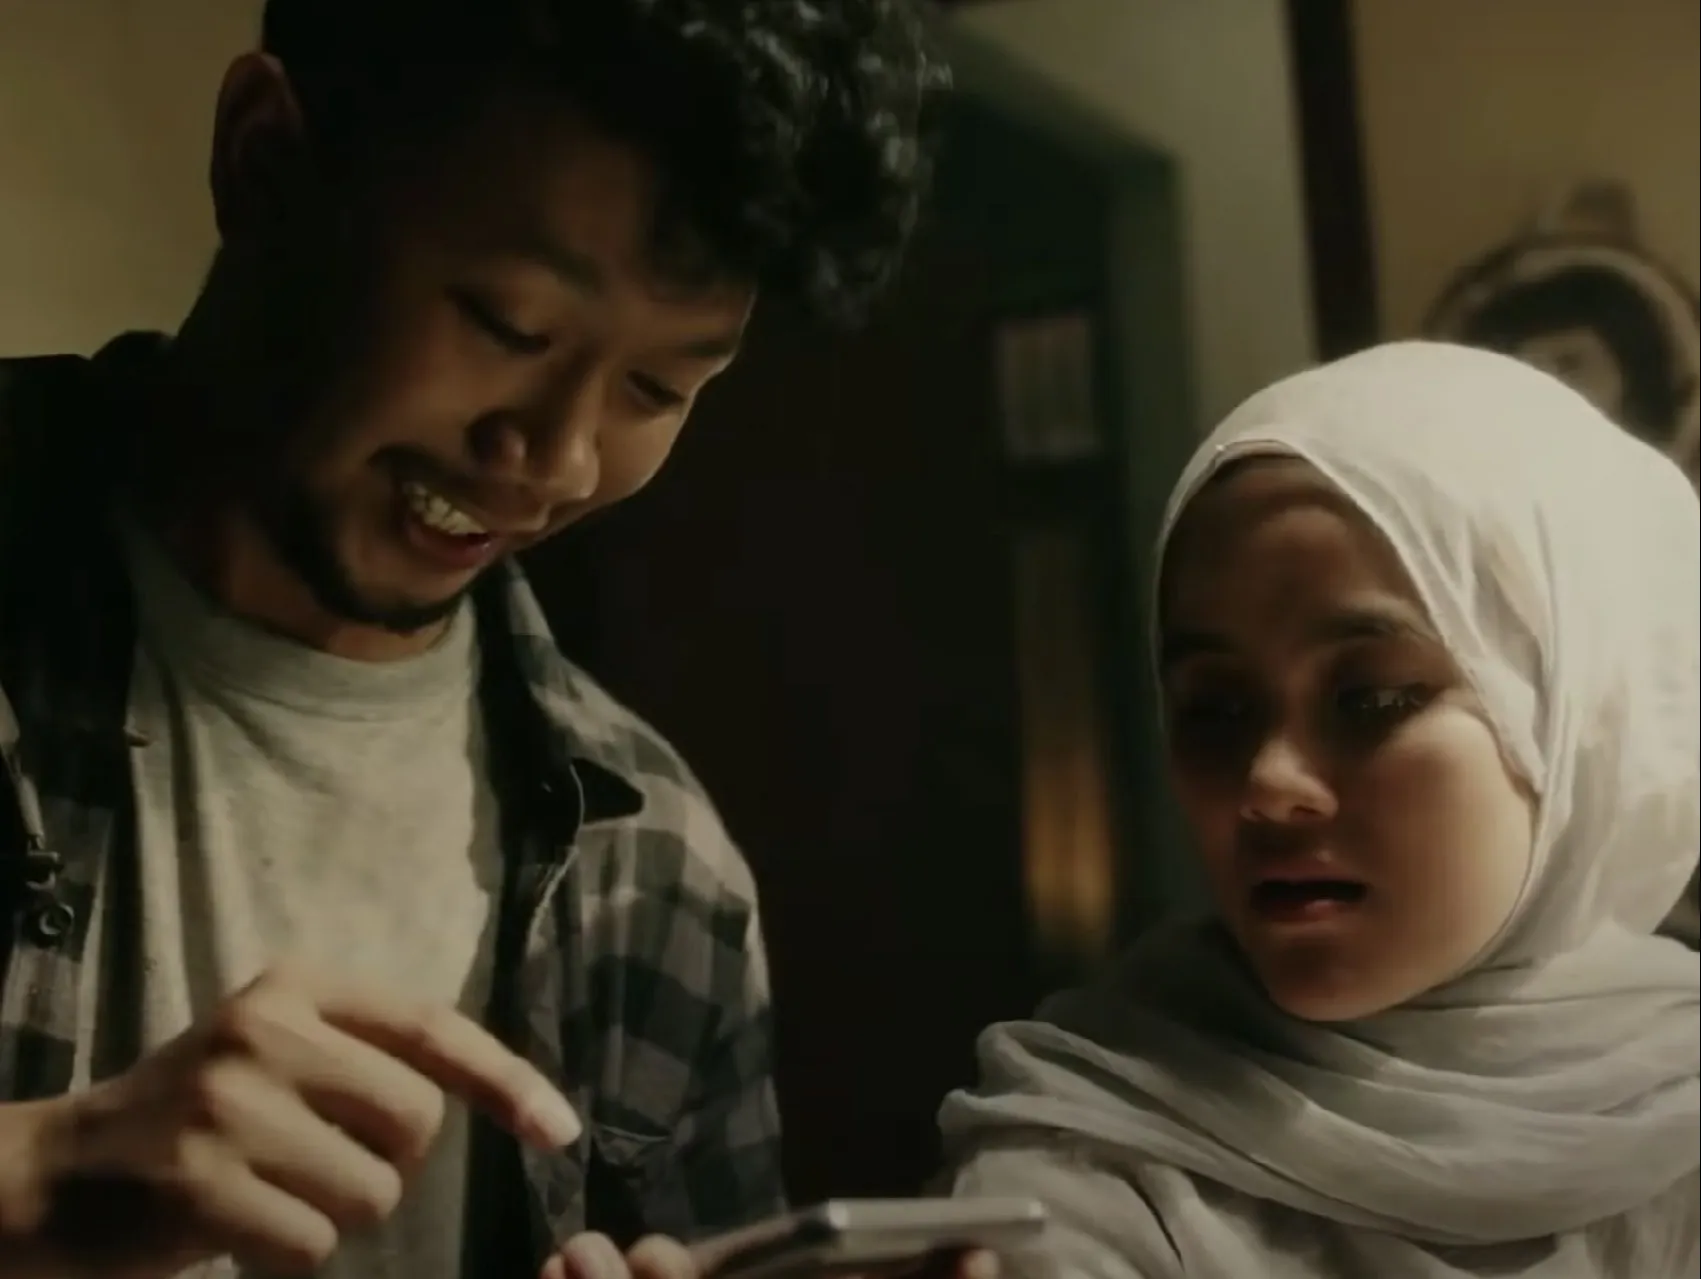 New campaign from Indonesian telecom firm Tri encourages youth to â€˜Bring It Onâ€™